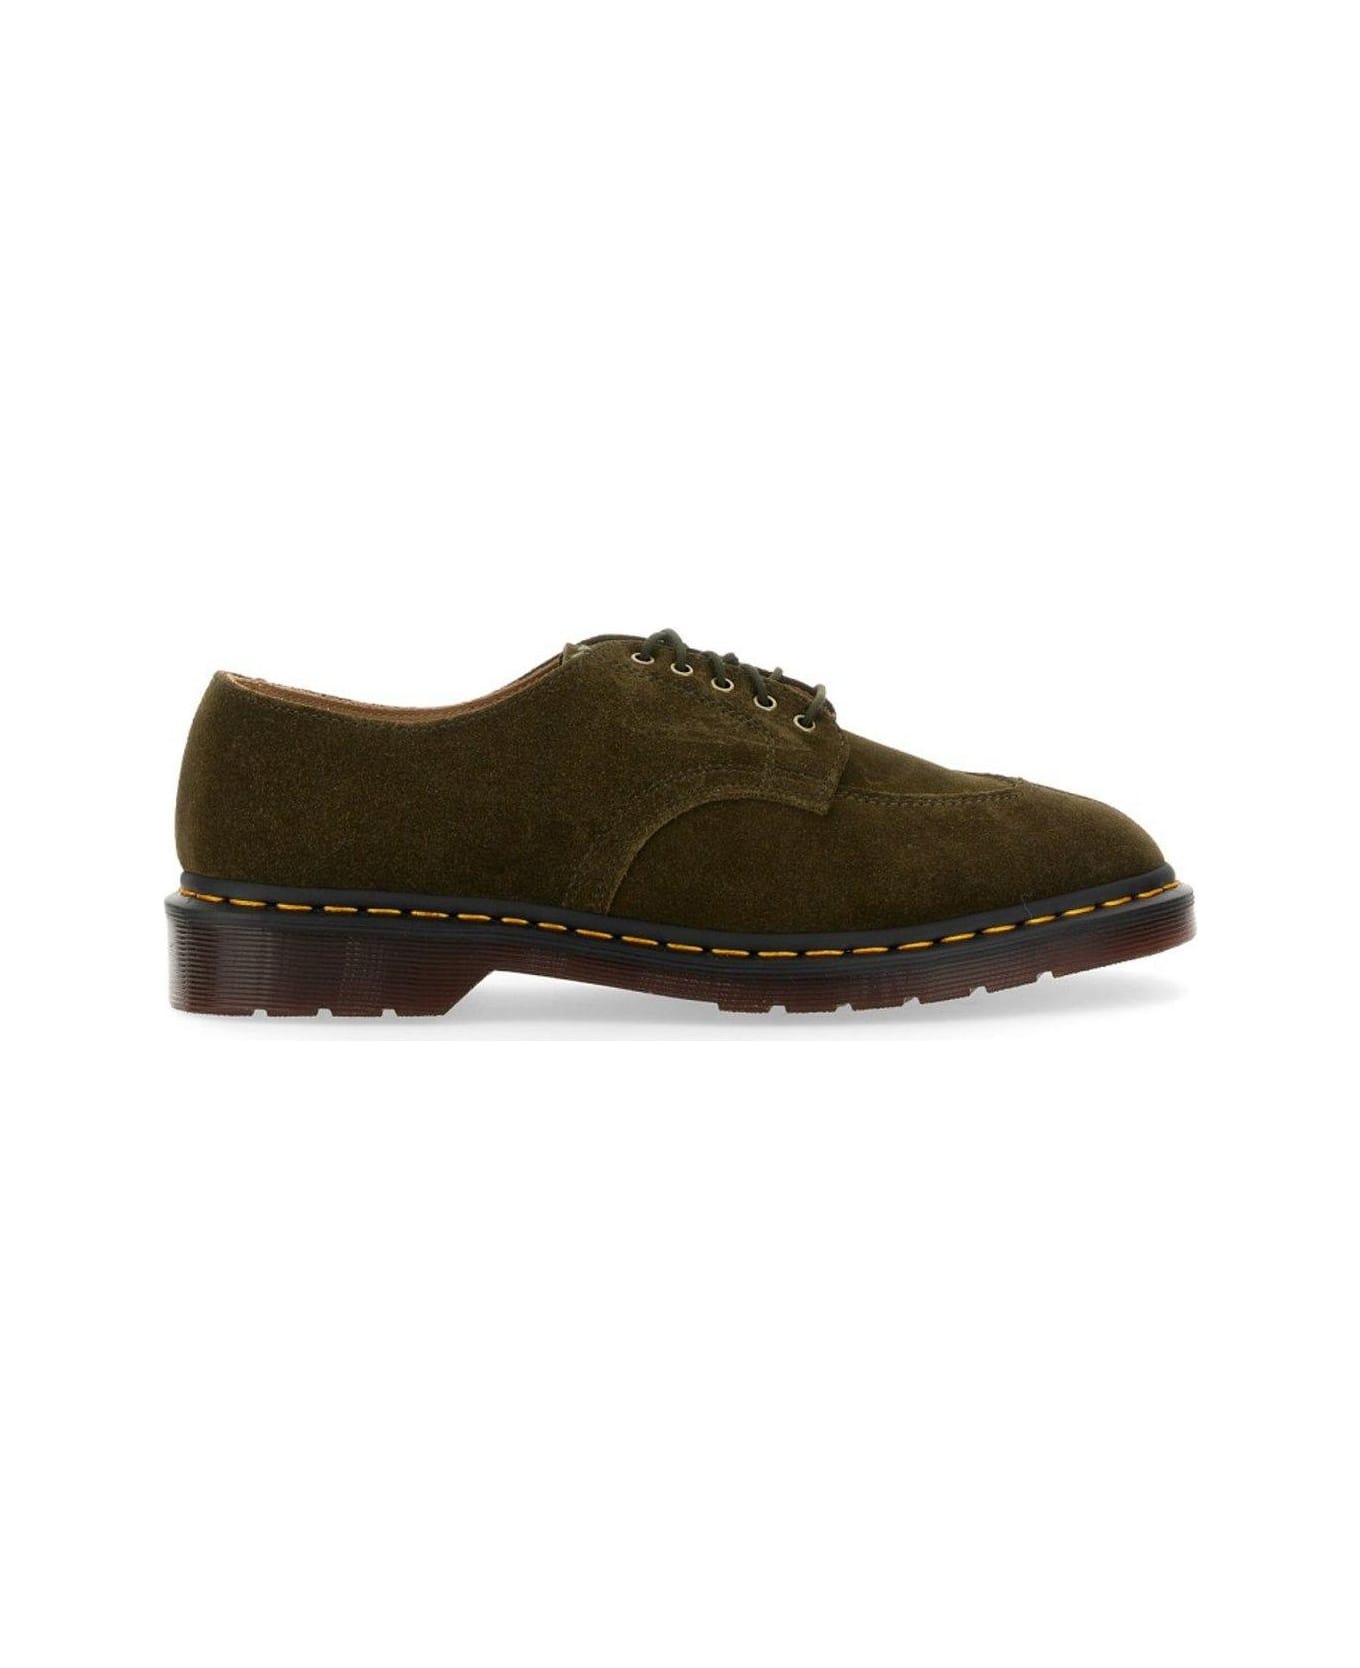 Dr. Martens Lace-up Shoes - Green